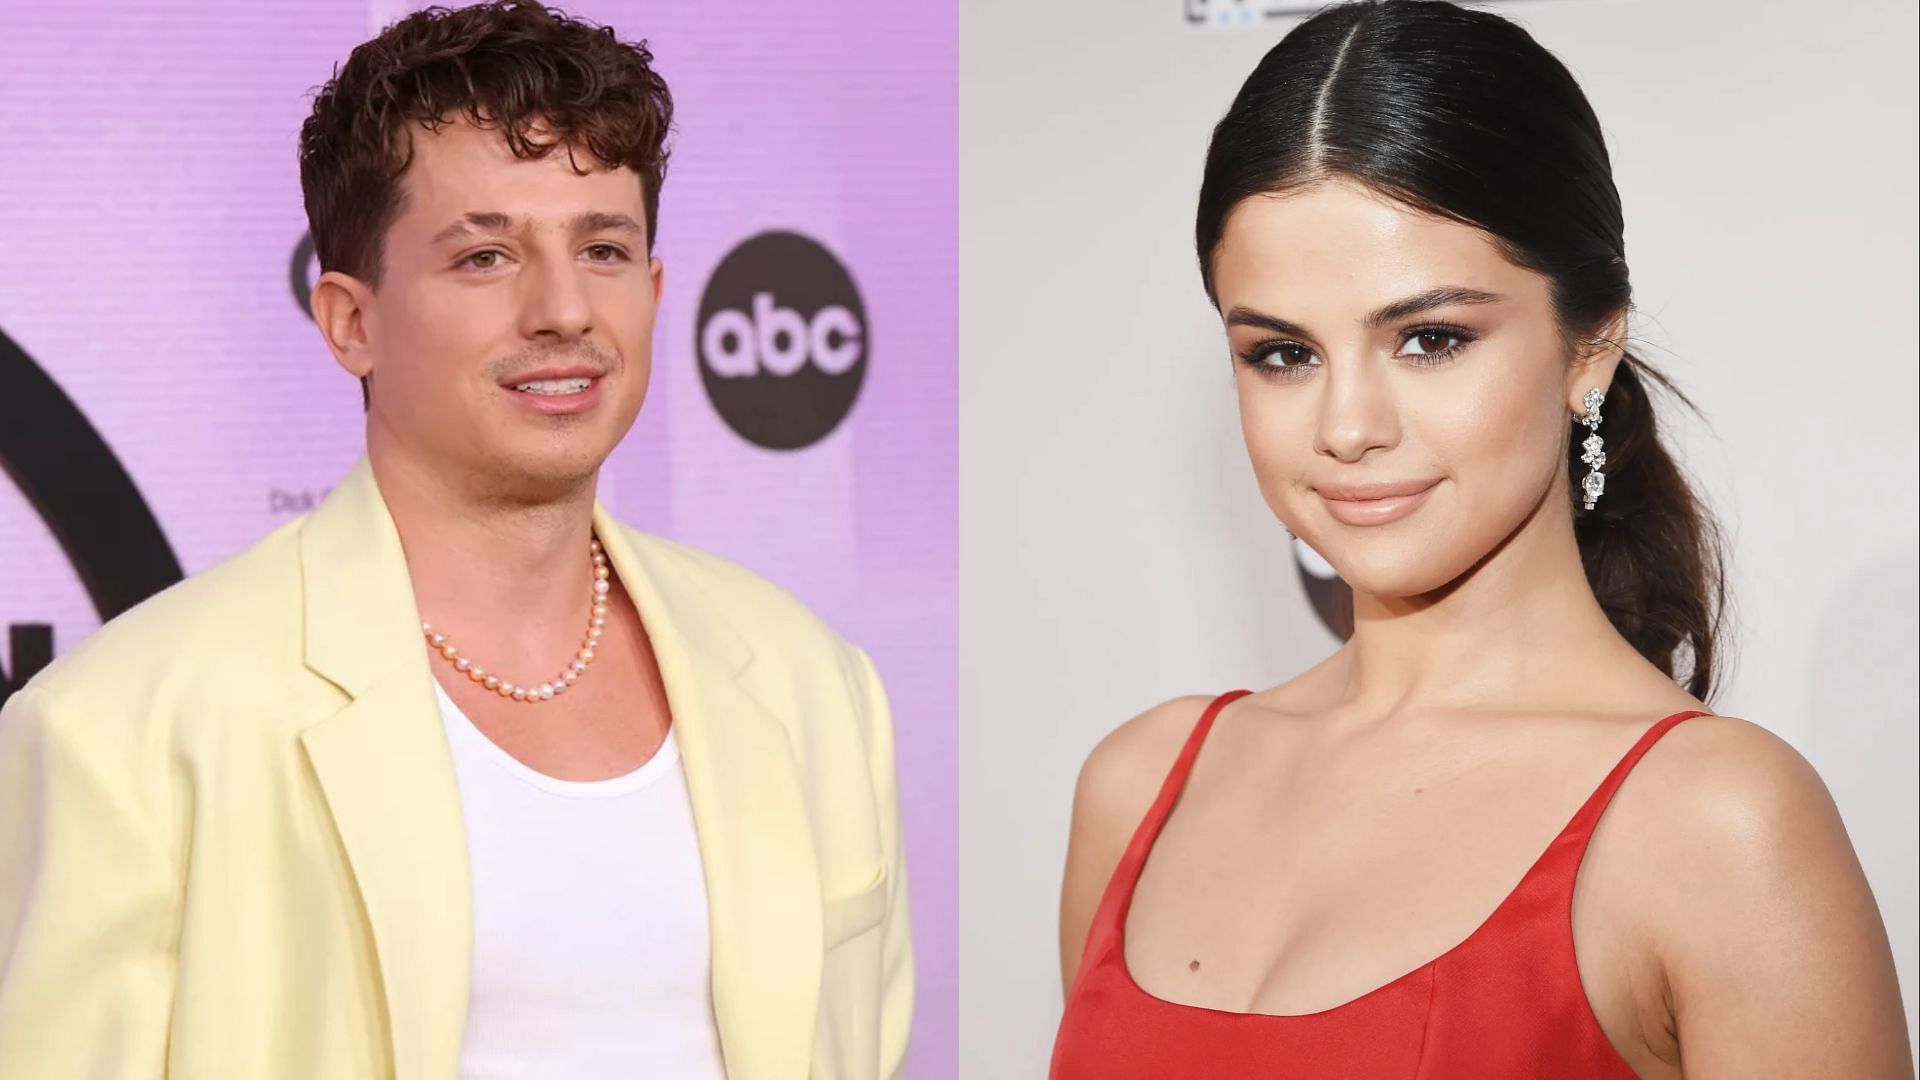 Selena Gomez fans slams Charlie Puth for allegedly shading Selena on his deleted tweet. (Image via Getty Images)